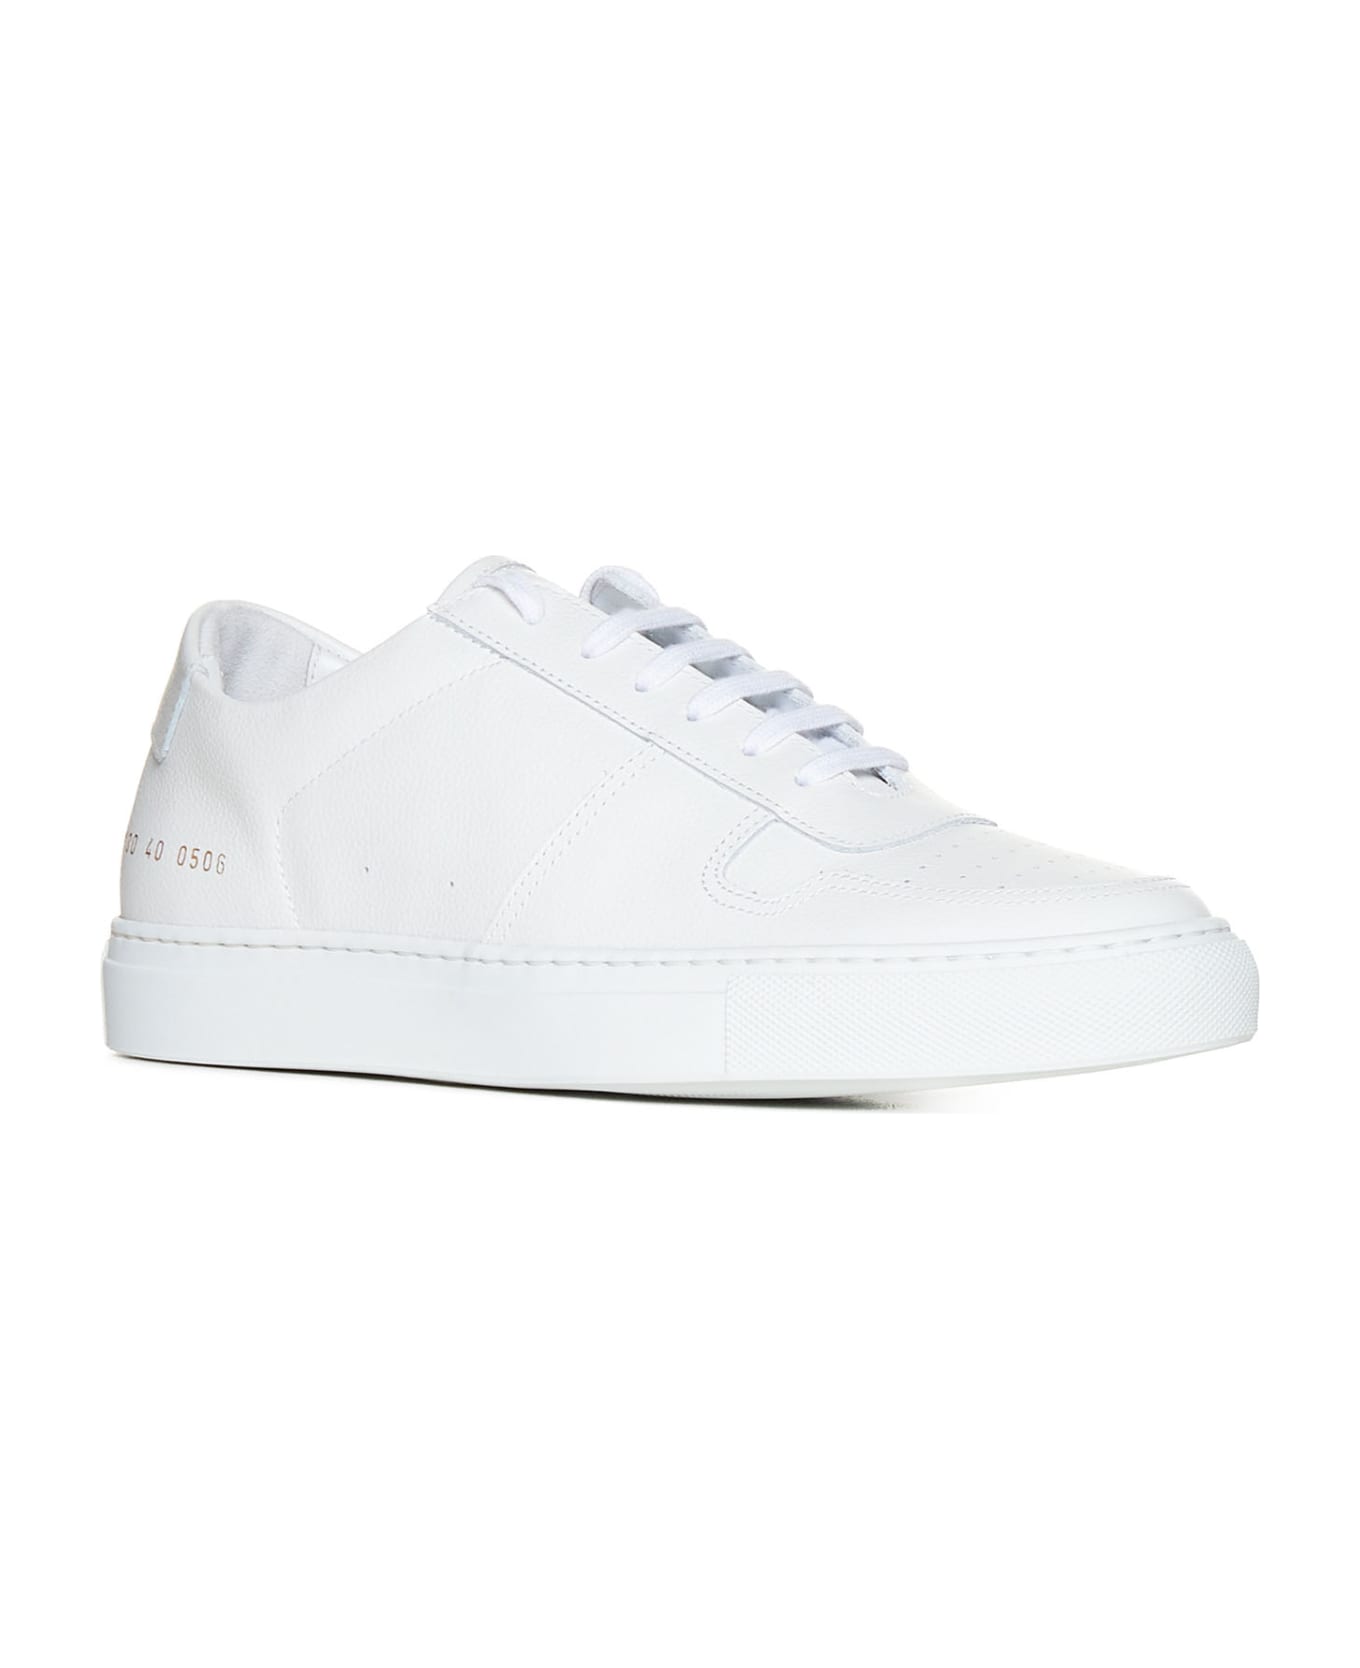 Common Projects Bball Classic Leather Sneakers - White スニーカー